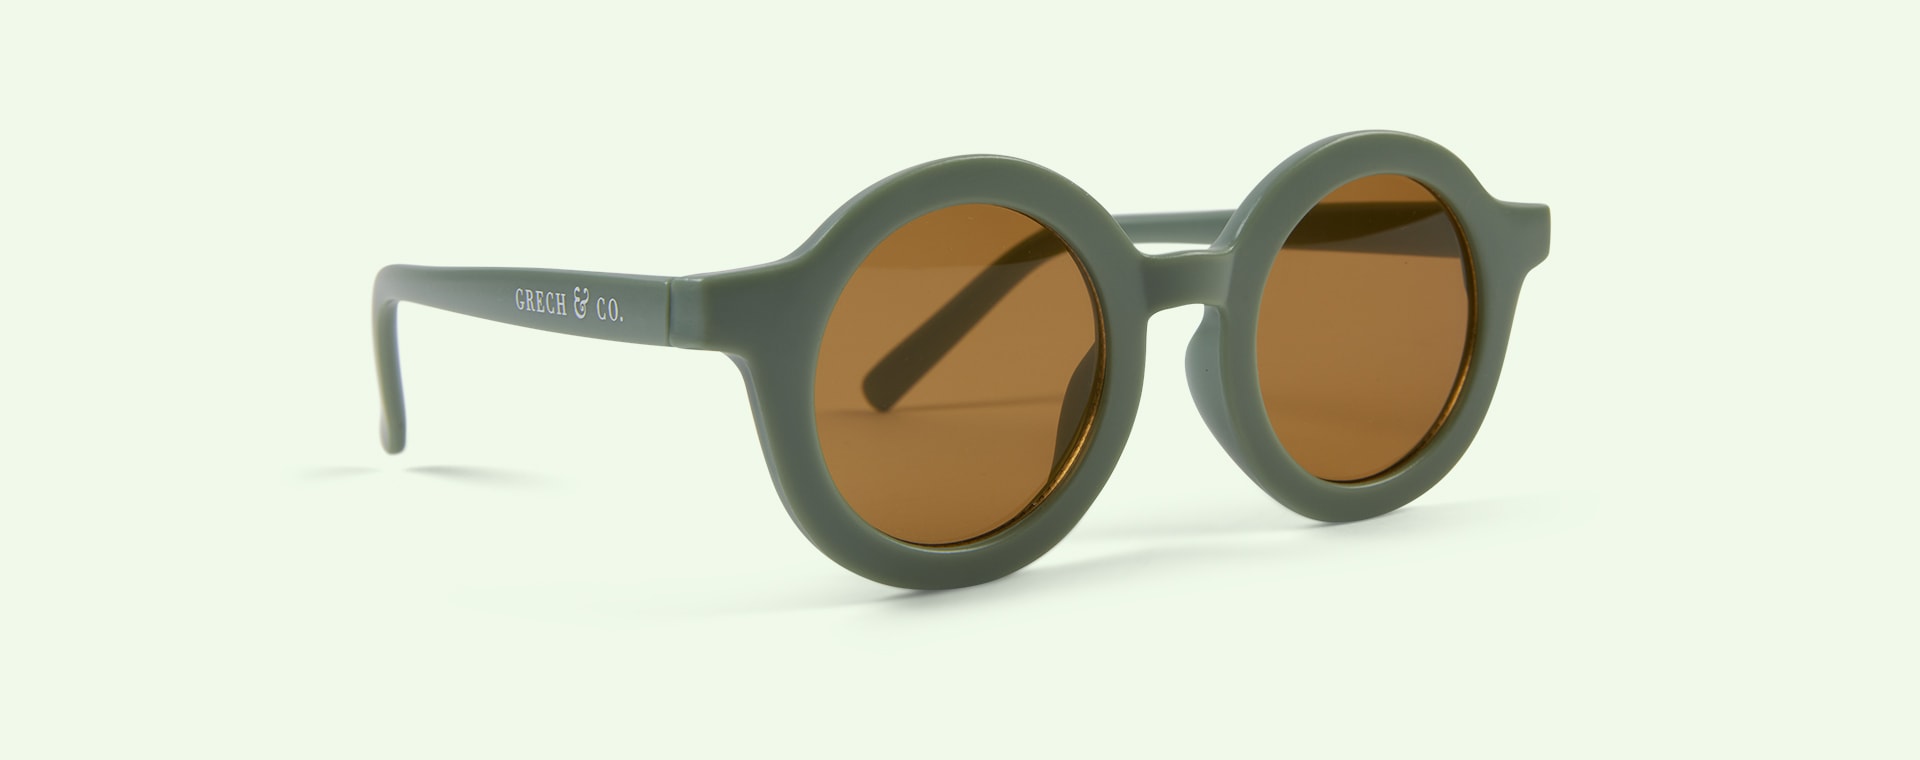 Fern Grech & Co Sustainable Sunglasses